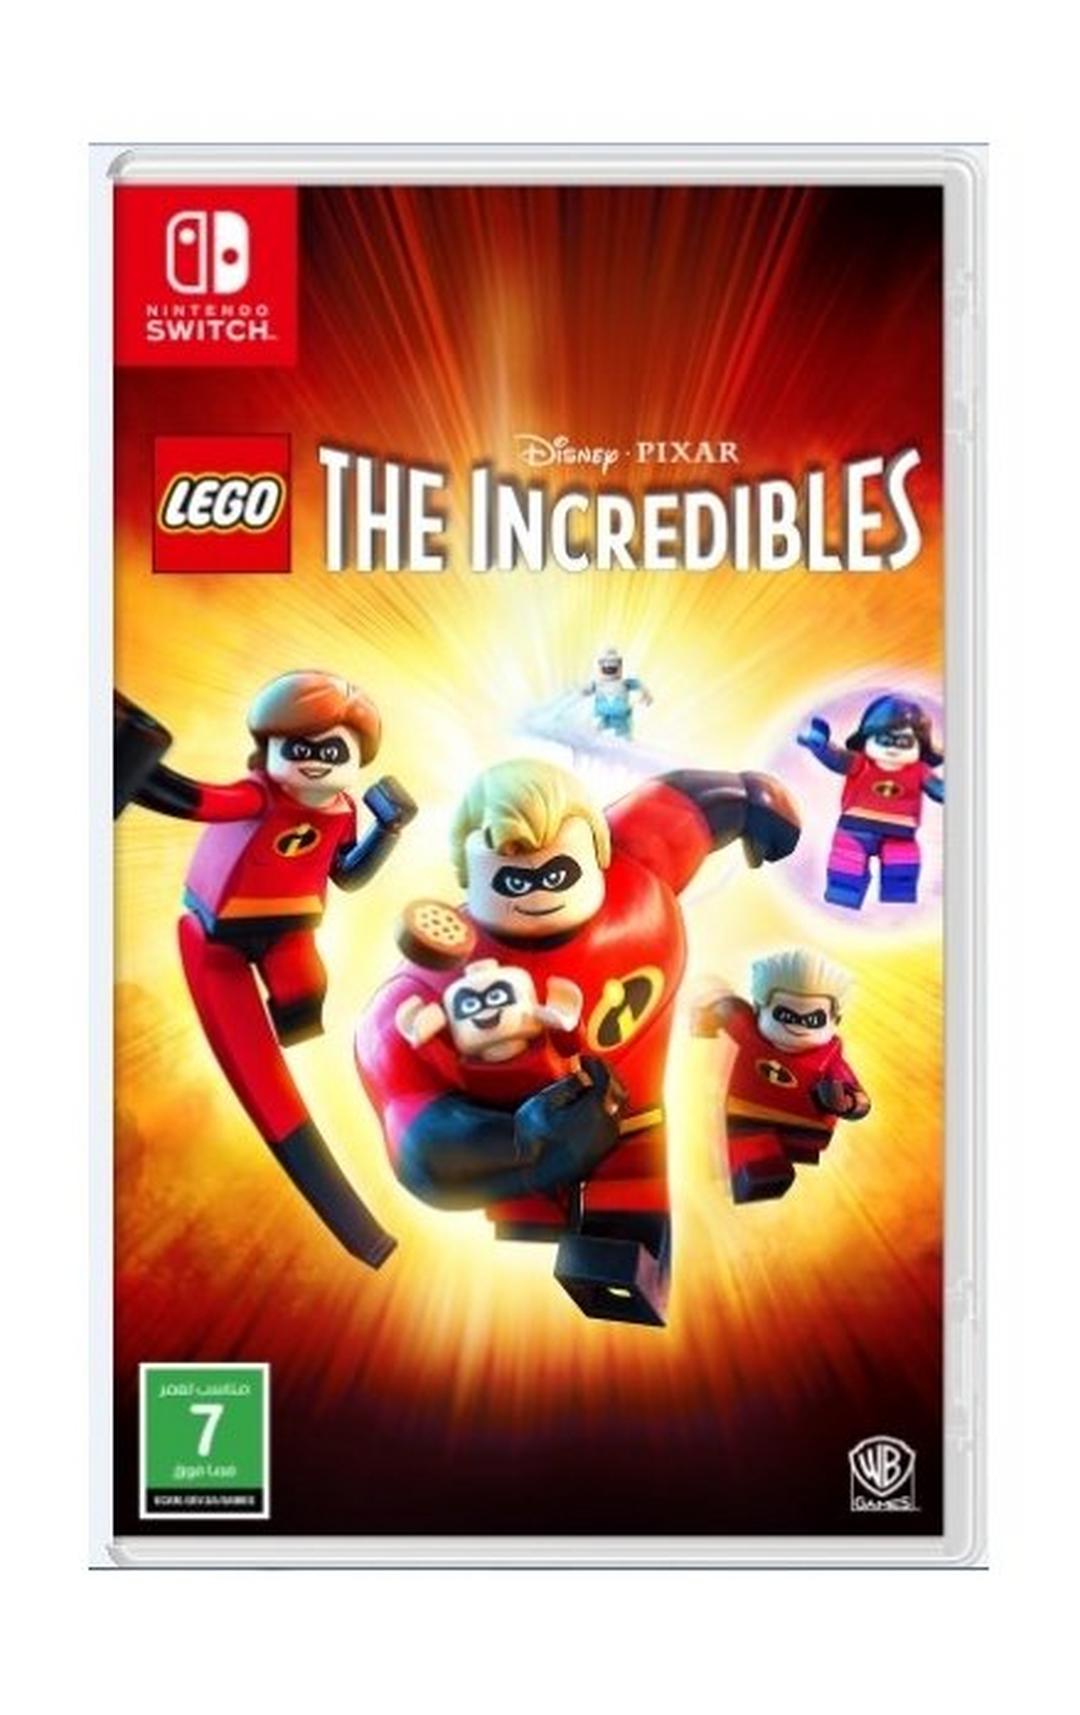 Lego The Incredibles - Nintendo Switch